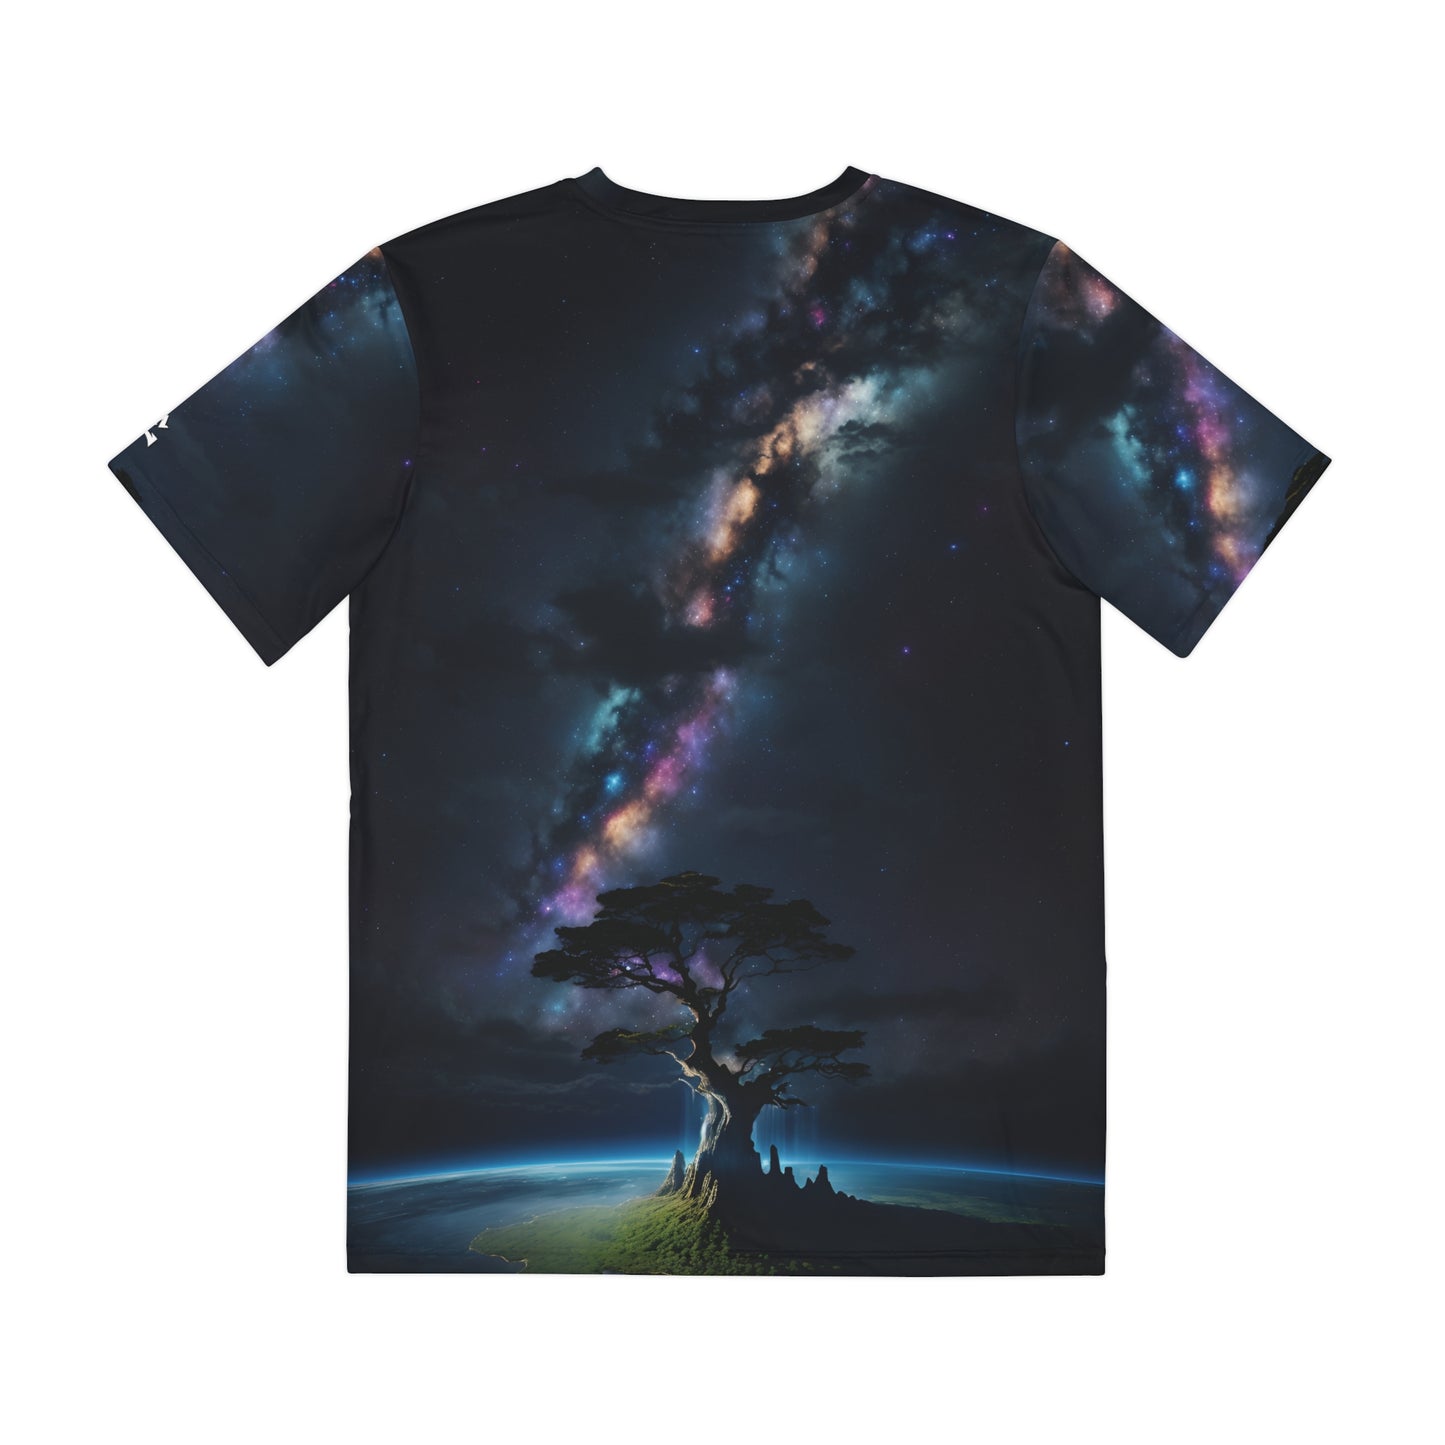 Galactic Arboretum: The Tree in the Galaxy Sky